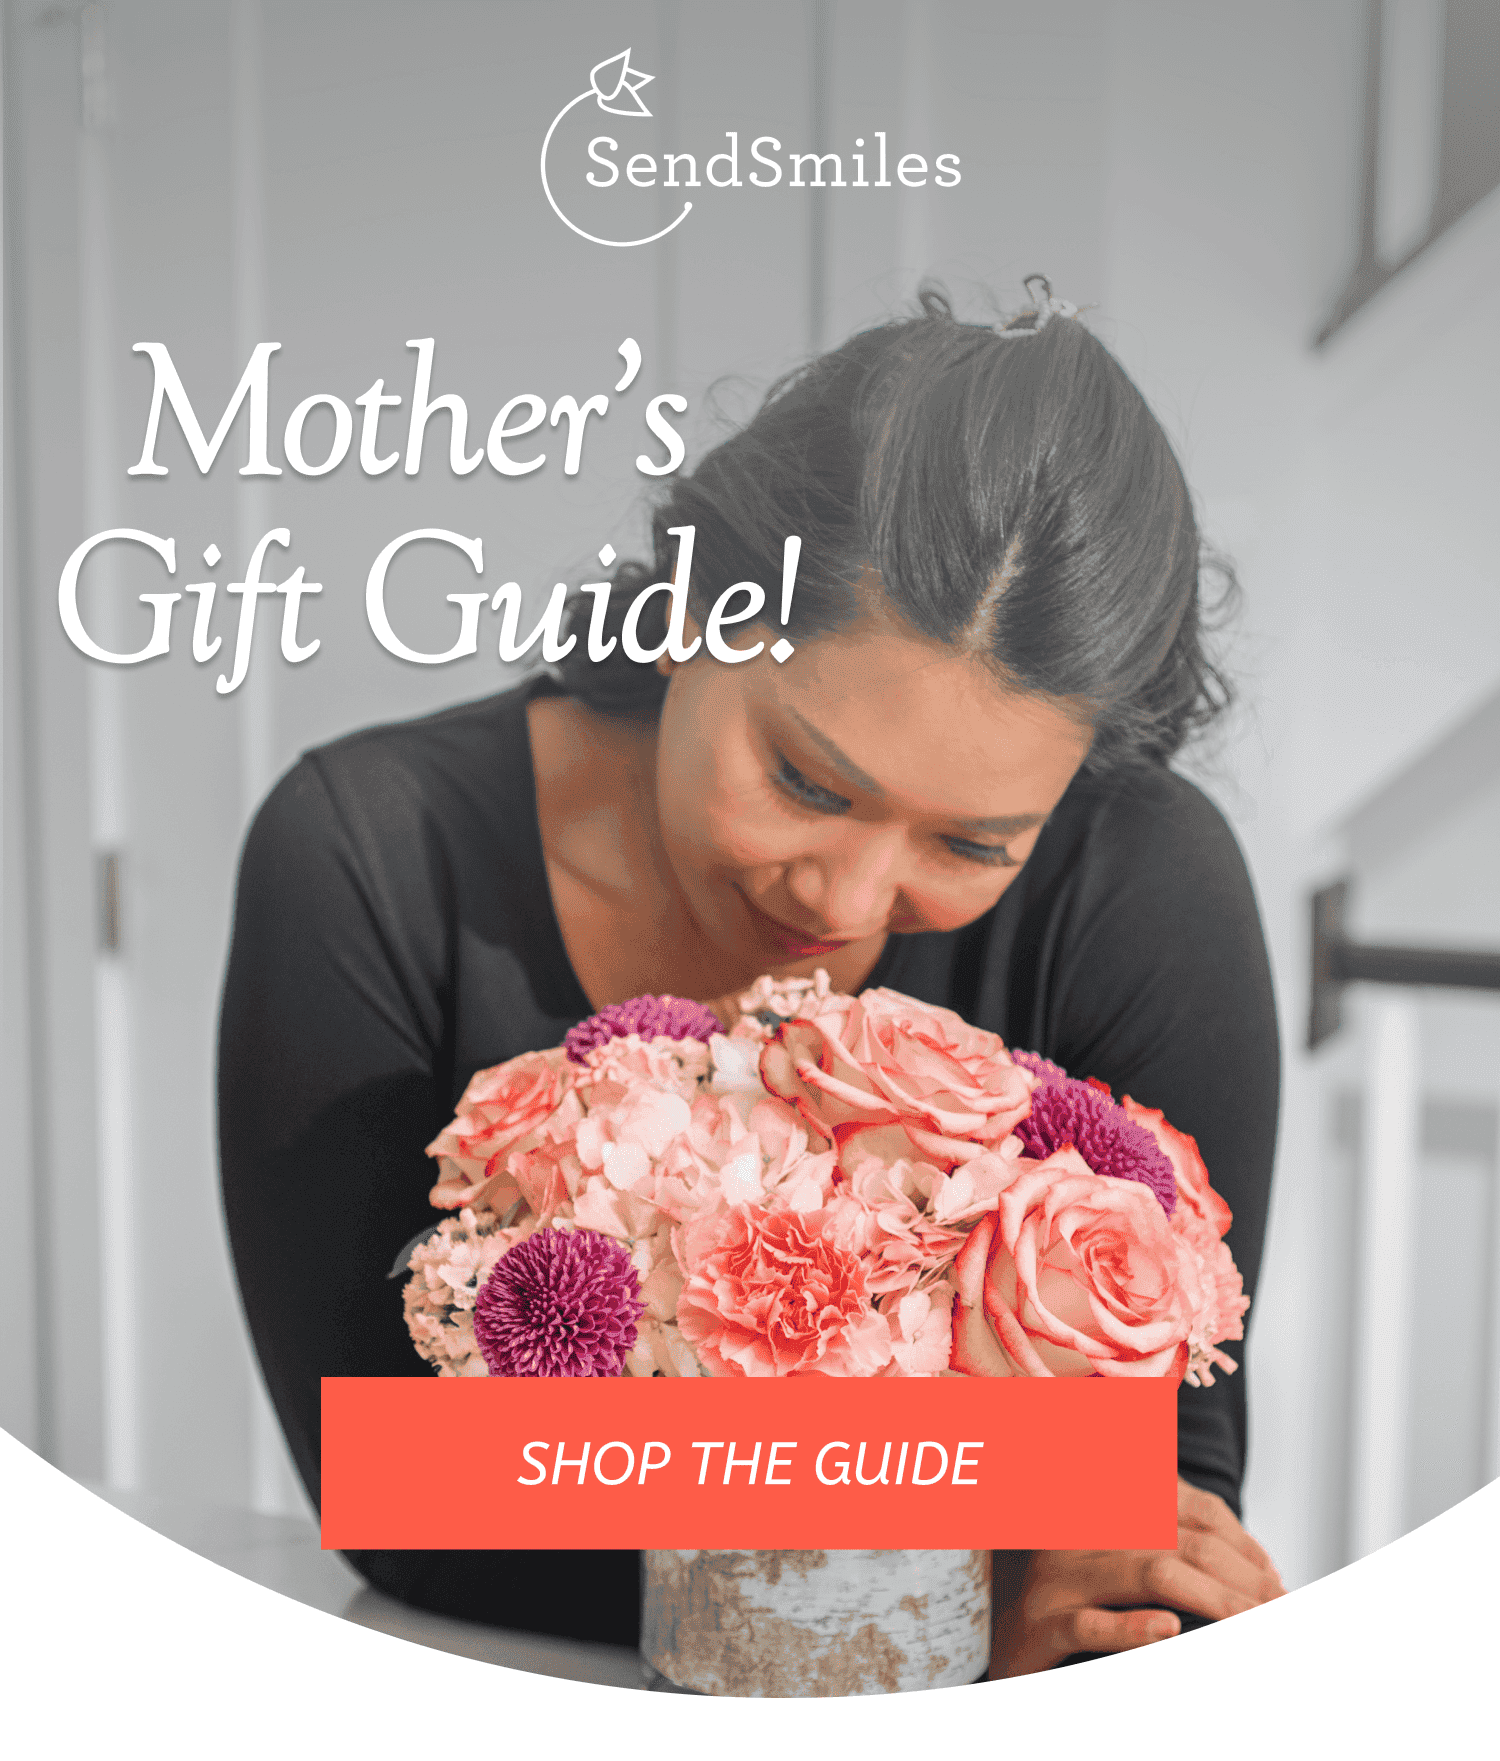 Mother’s Gift Guide! Shop the guide